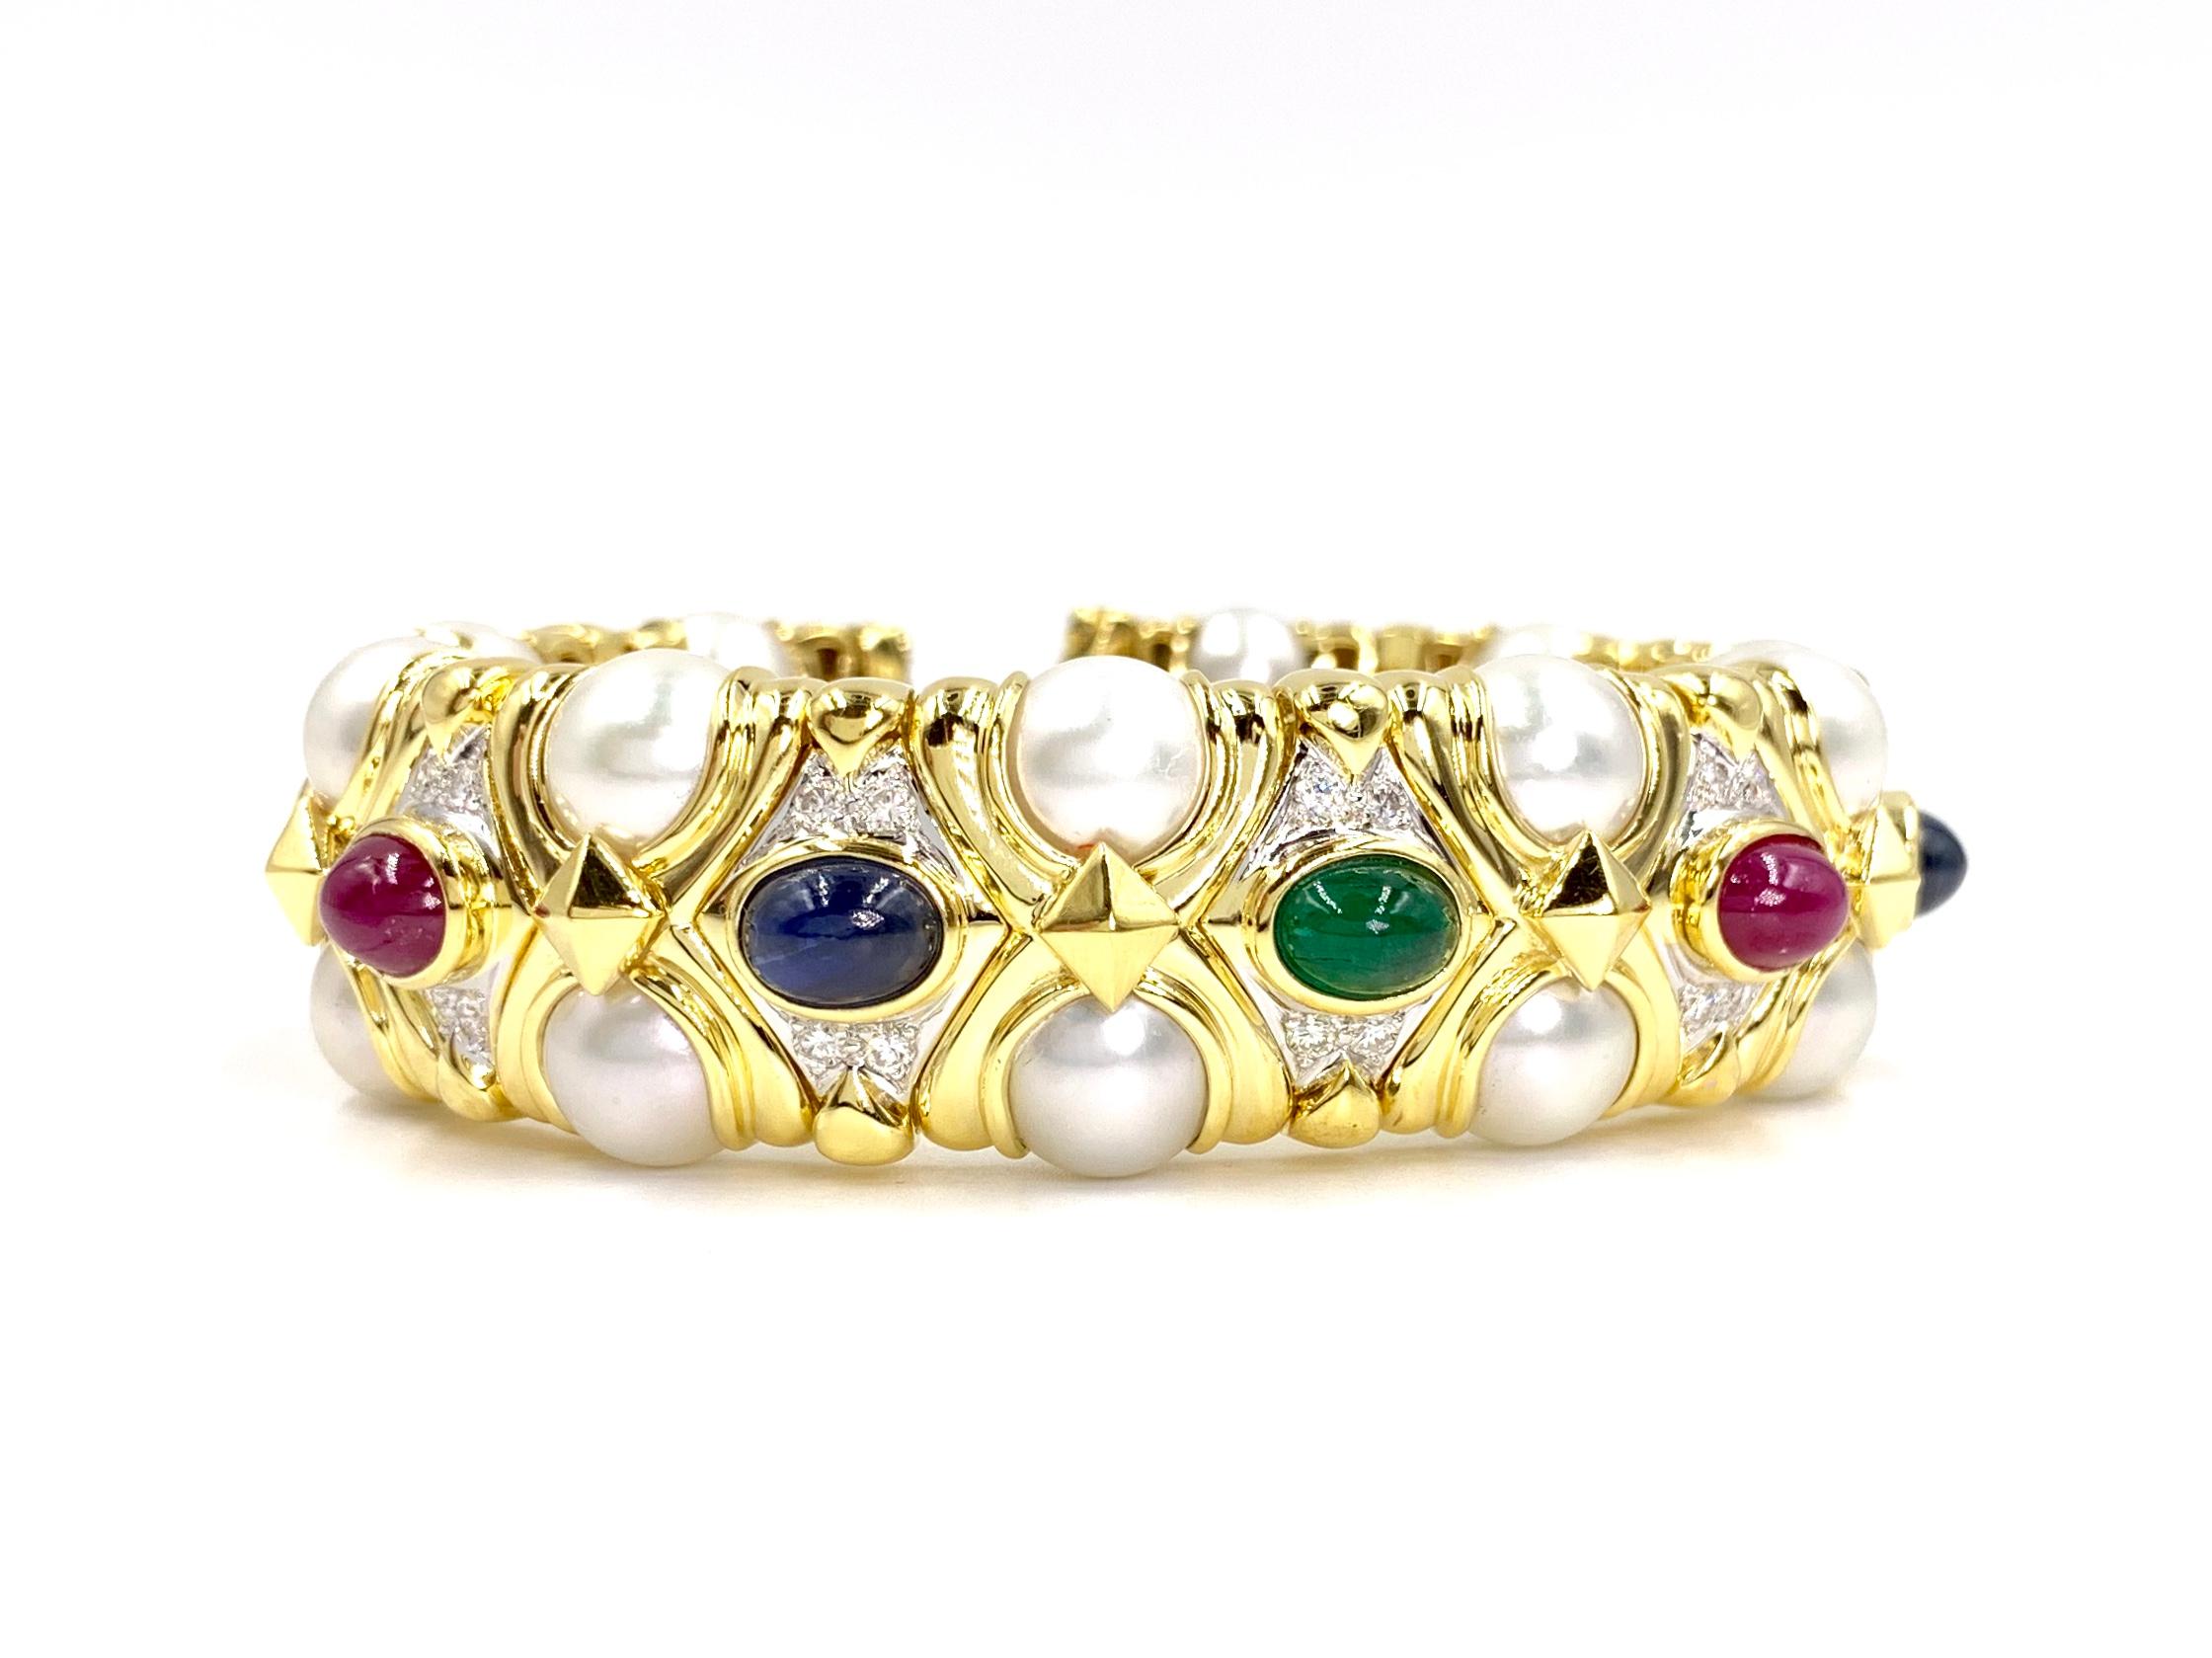 Incredibly crafted in 18 karat yellow gold, this cuff bracelet features lustrous cultured pearls, rubies, blue sapphires, diamonds and a single emerald. Oval cabochon precious gemstones are well saturated. Diamond quality is approximately G color,